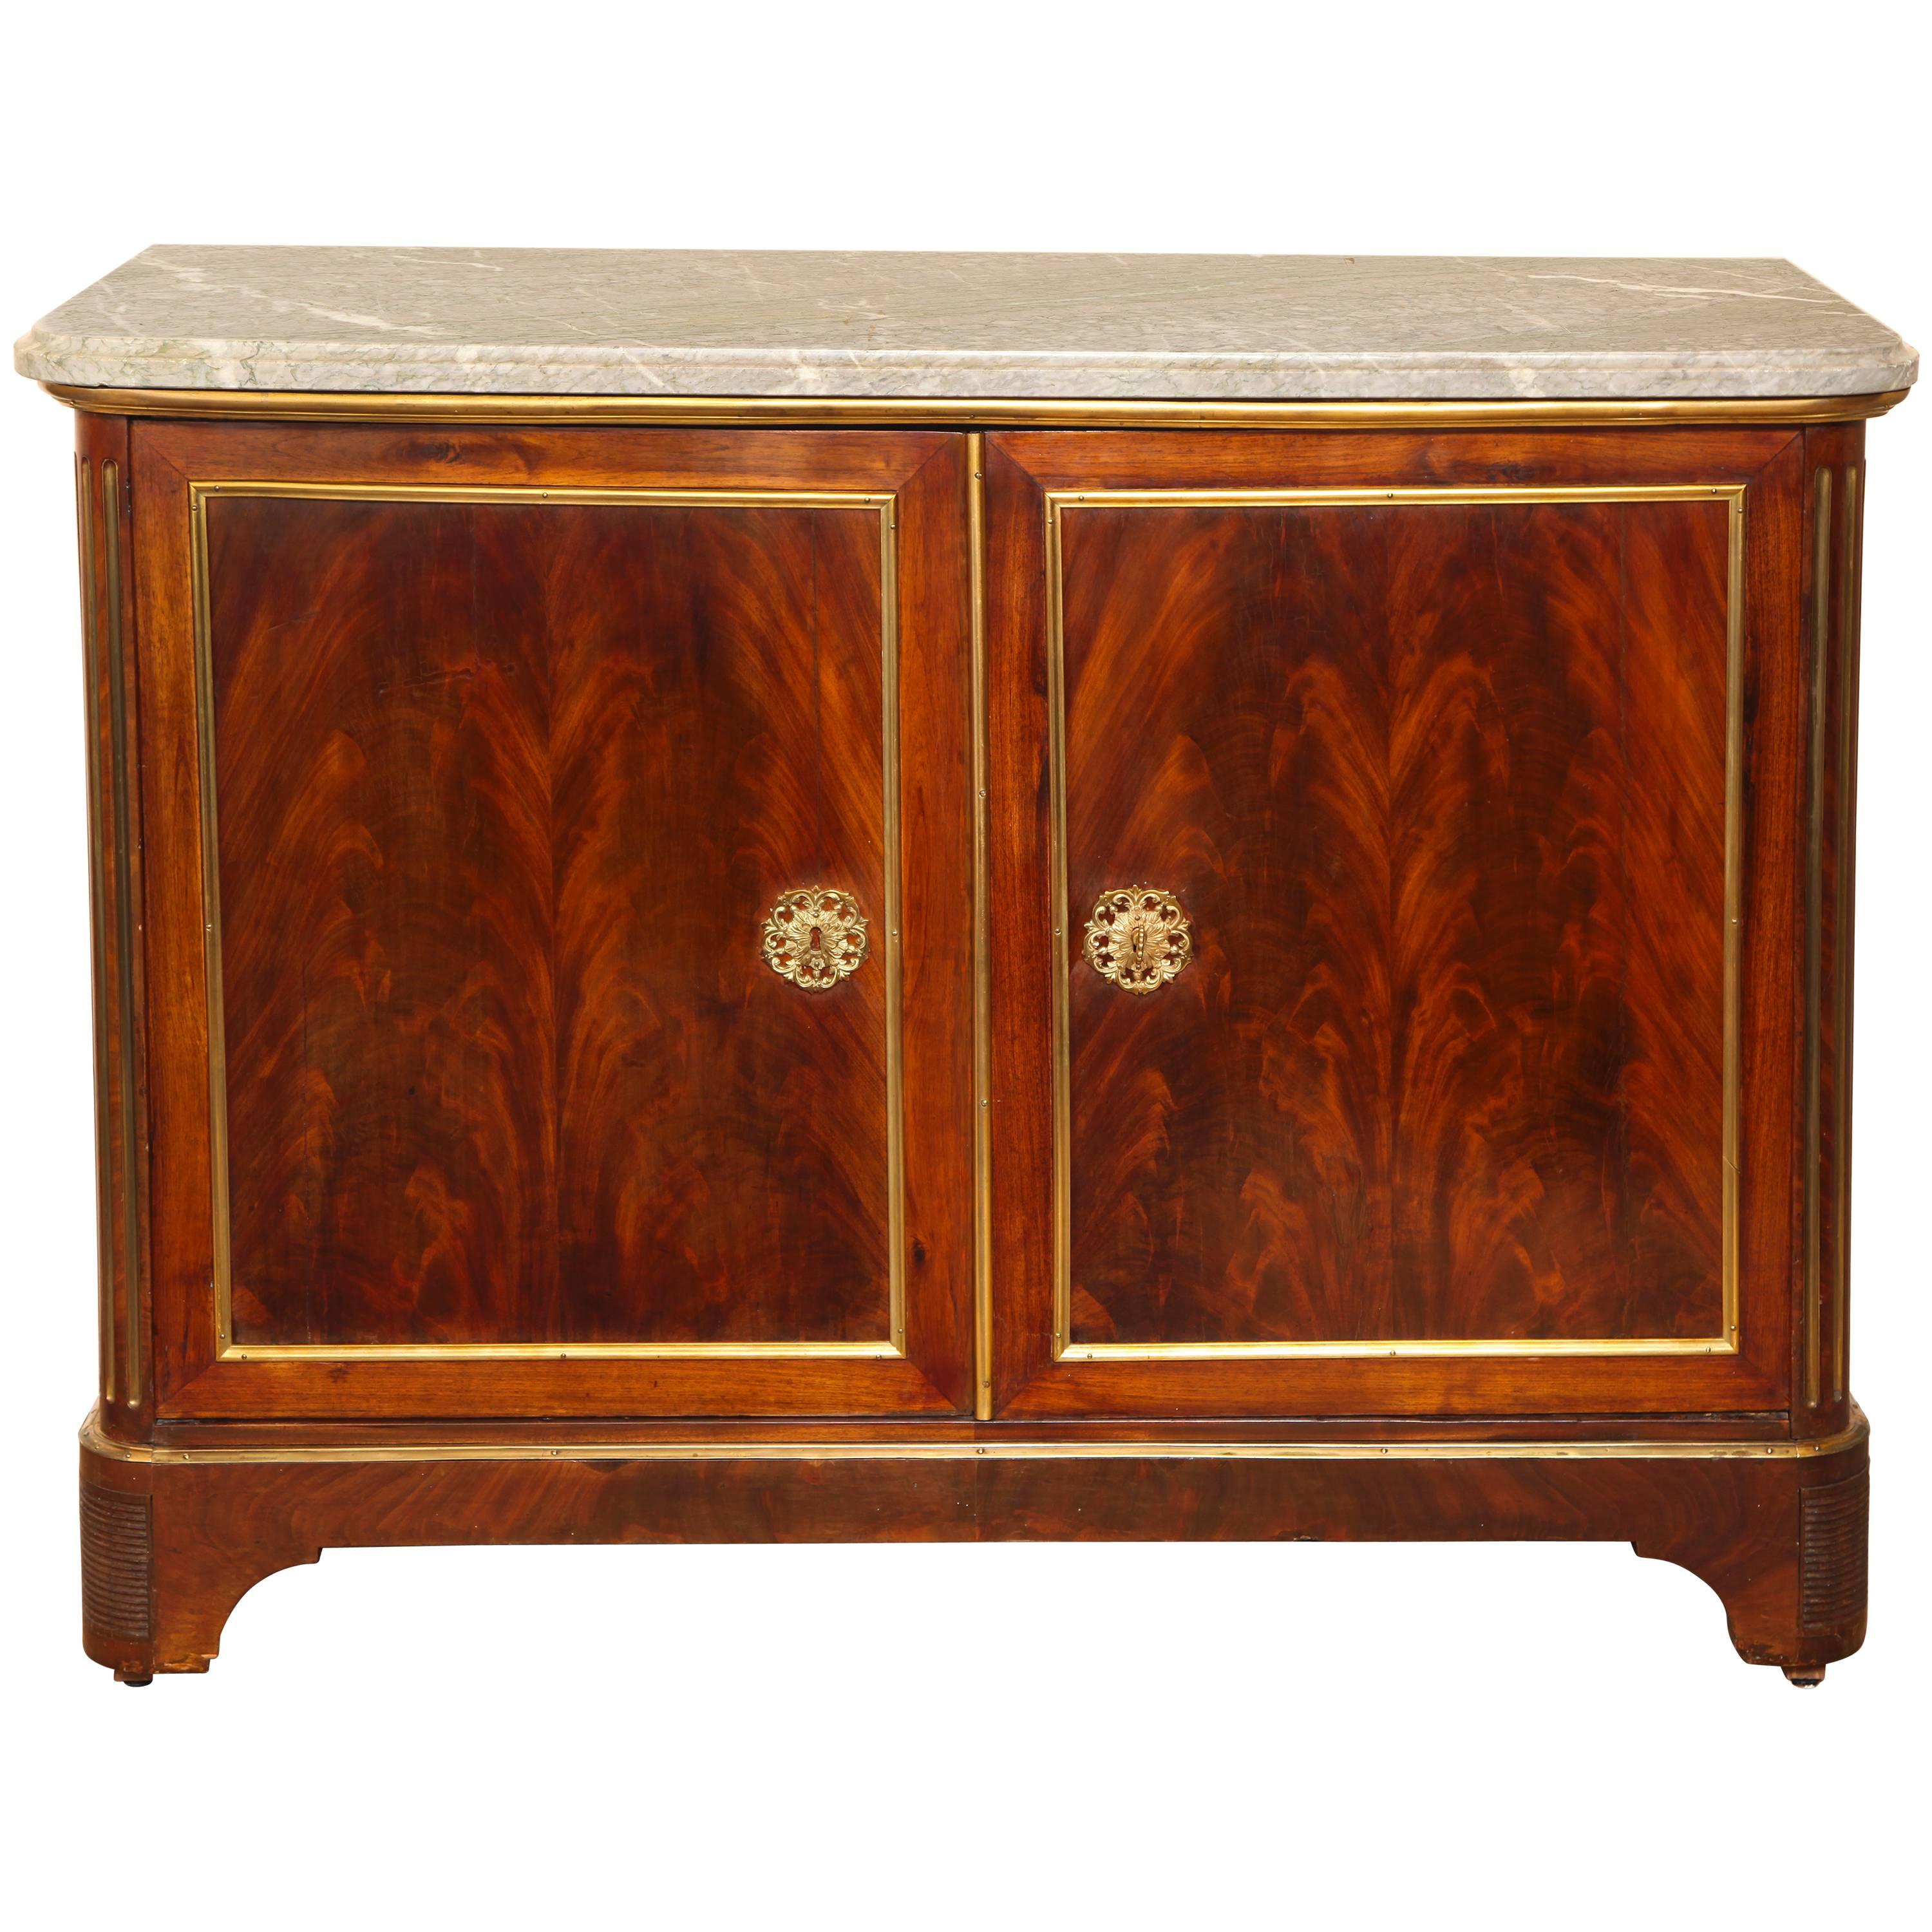 French Charles X Neoclassical Cabinet